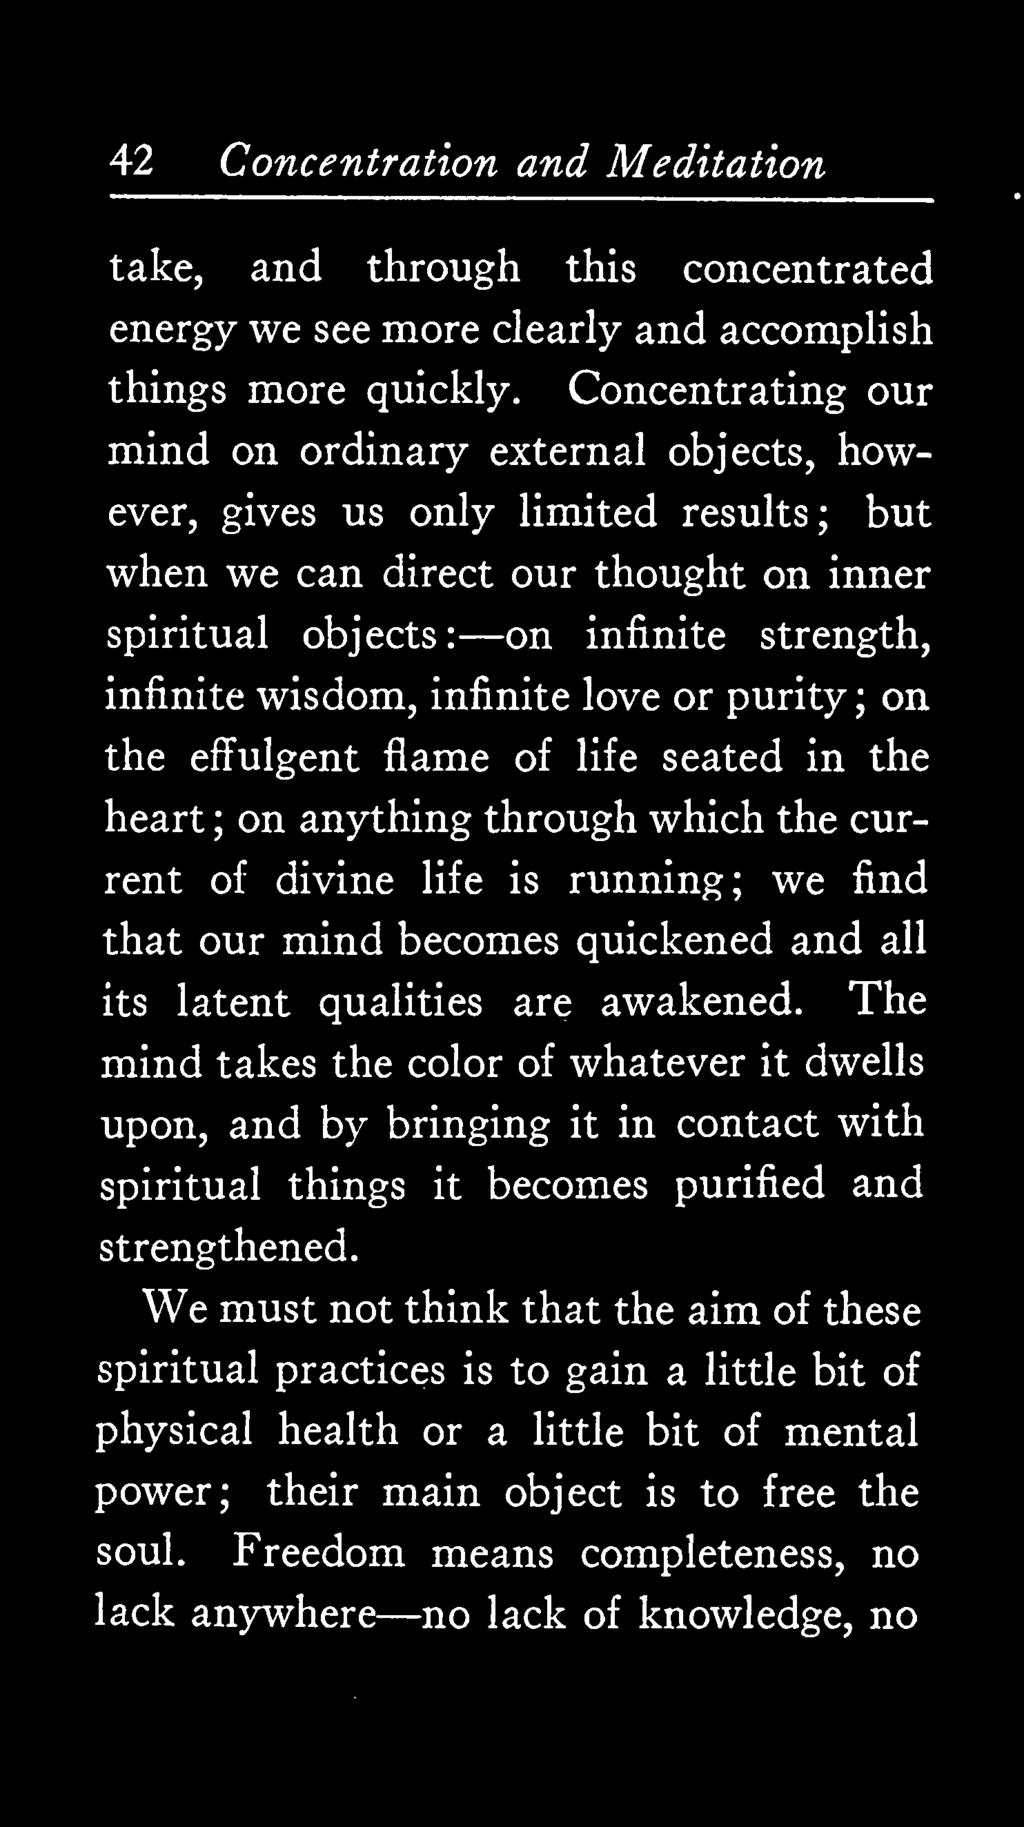 The mind takes the color of whatever it dwells upon, and by bringing it in contact with spiritual things it becomes purified and strengthened.